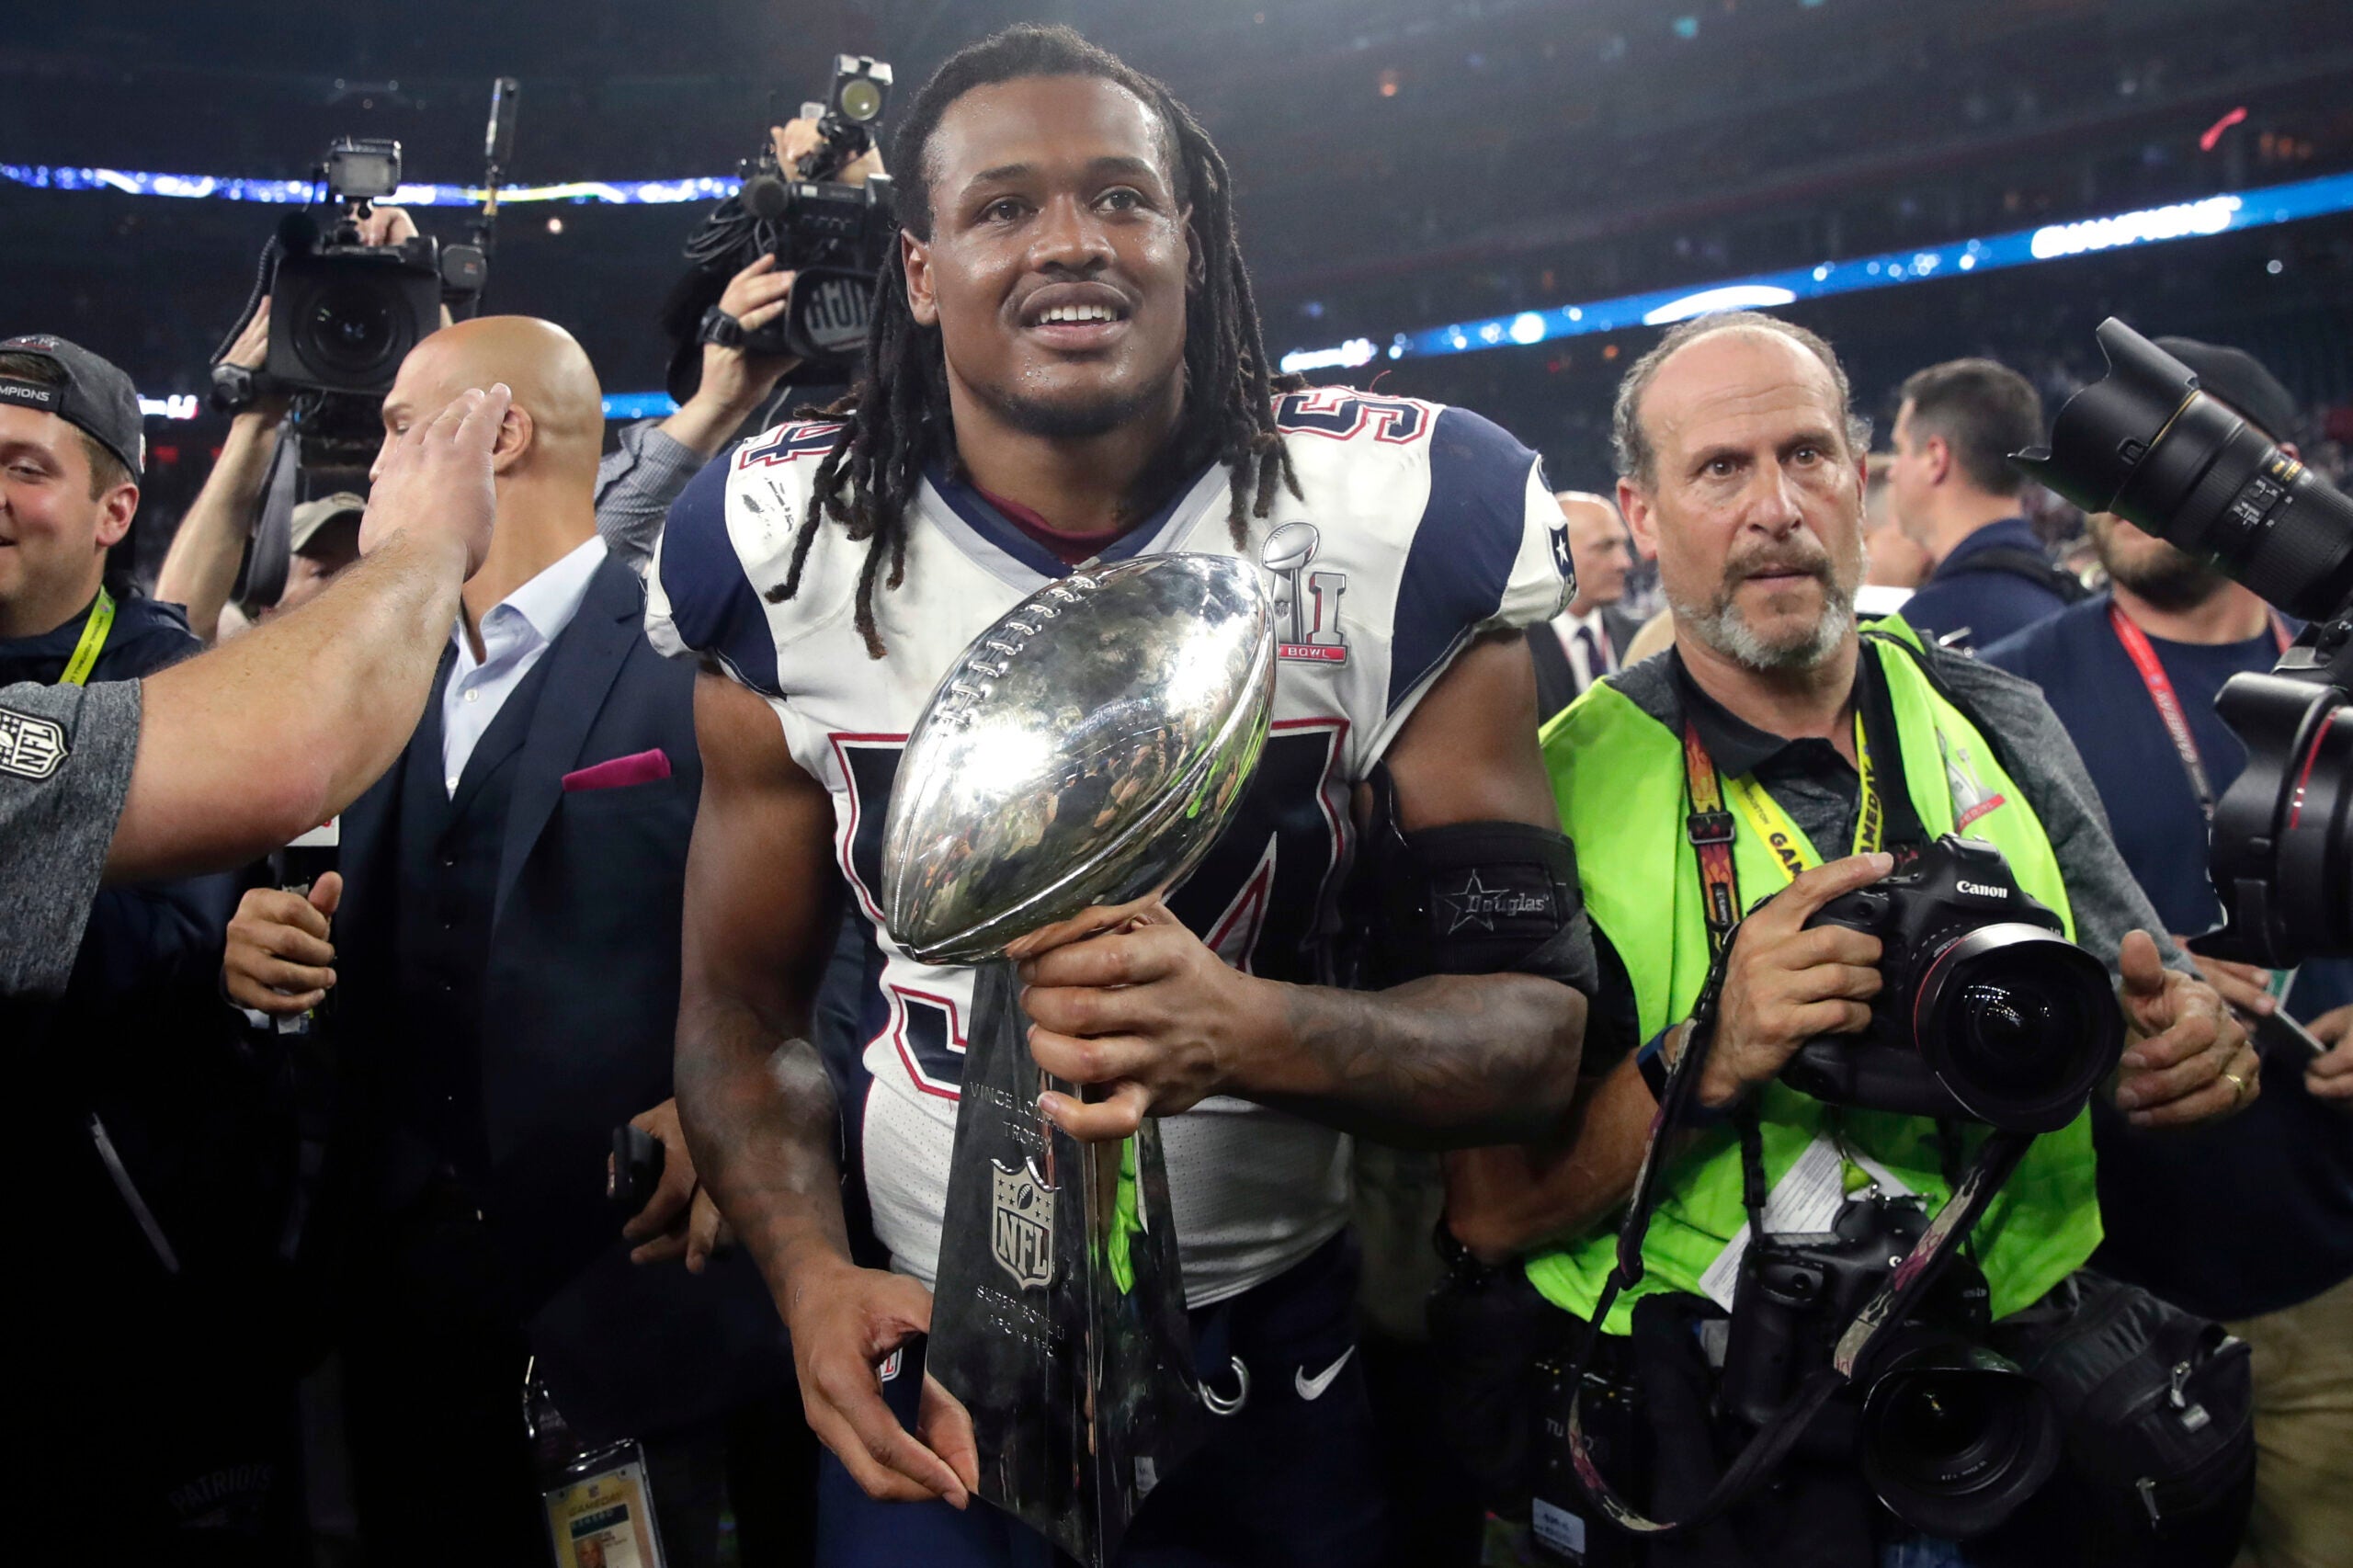 New England Patriots' Dont'a Hightower holds the Vince Lombardi Trophy after the NFL Super Bowl 51 football game against the Atlanta Falcons Sunday, Feb. 5, 2017, in Houston. The Patriots won 34-28.